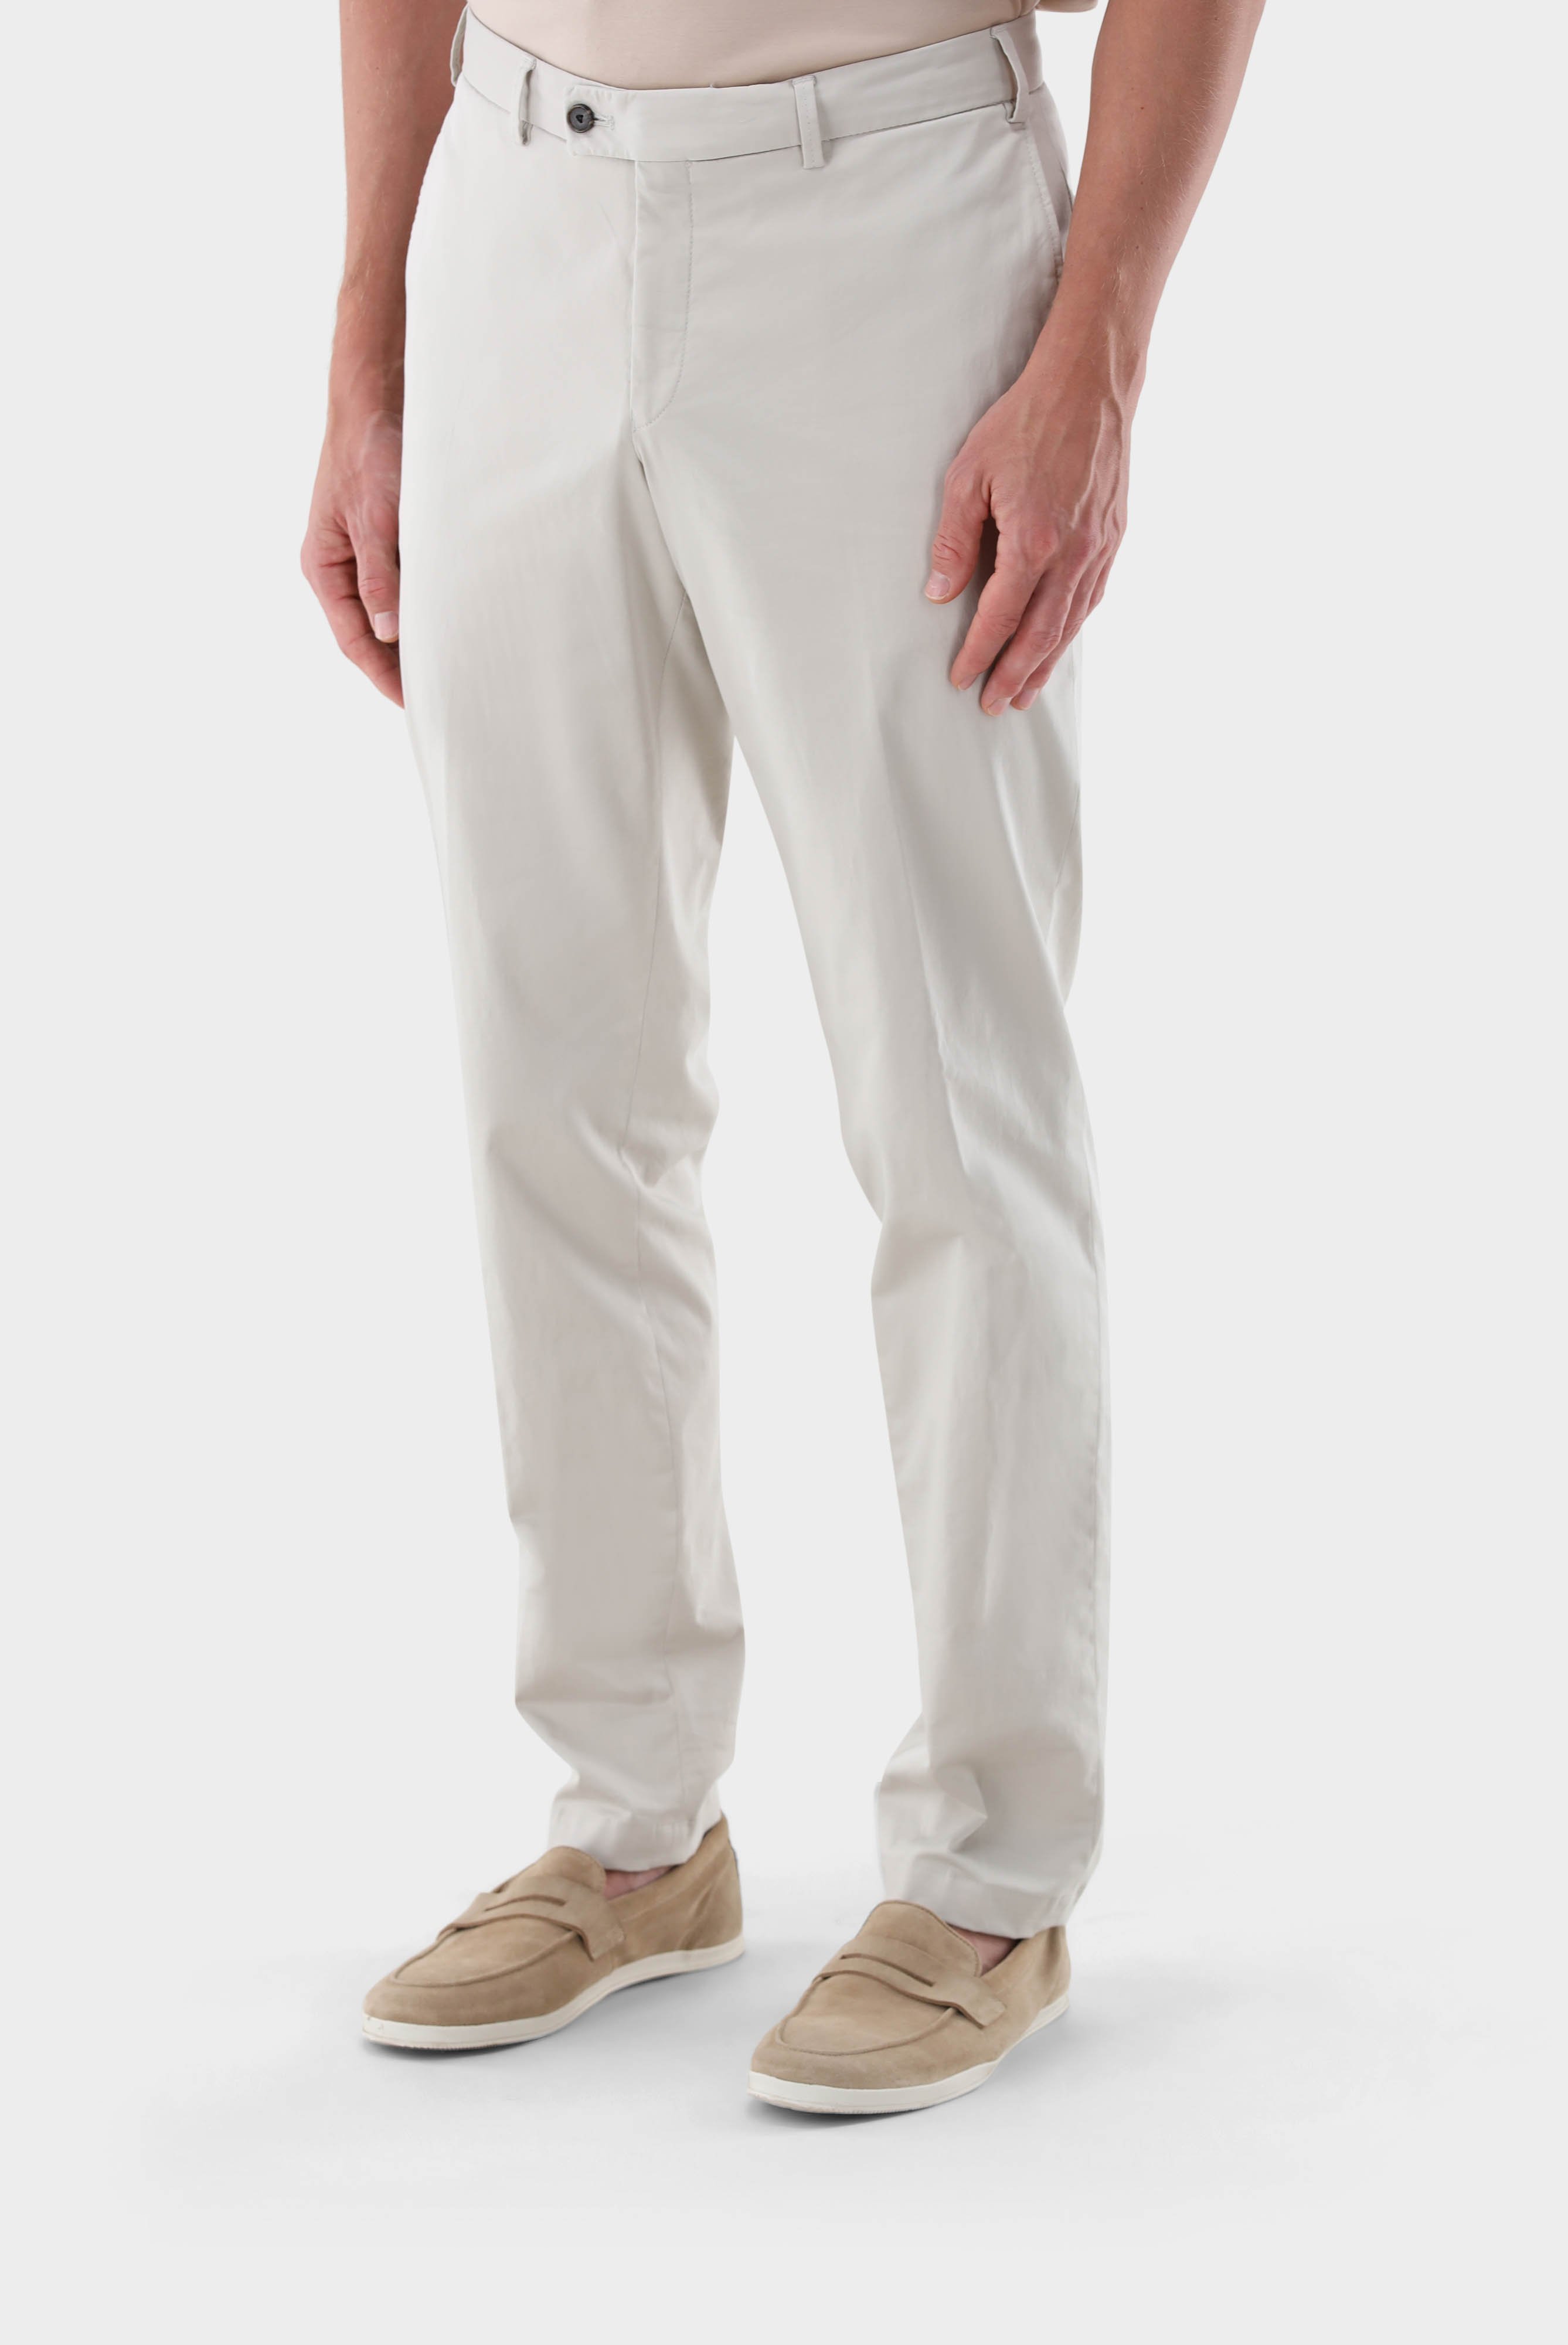 Jeans & Trousers+Cotton with Stretch Tapered Chinos+80.7858..J00151.110.44